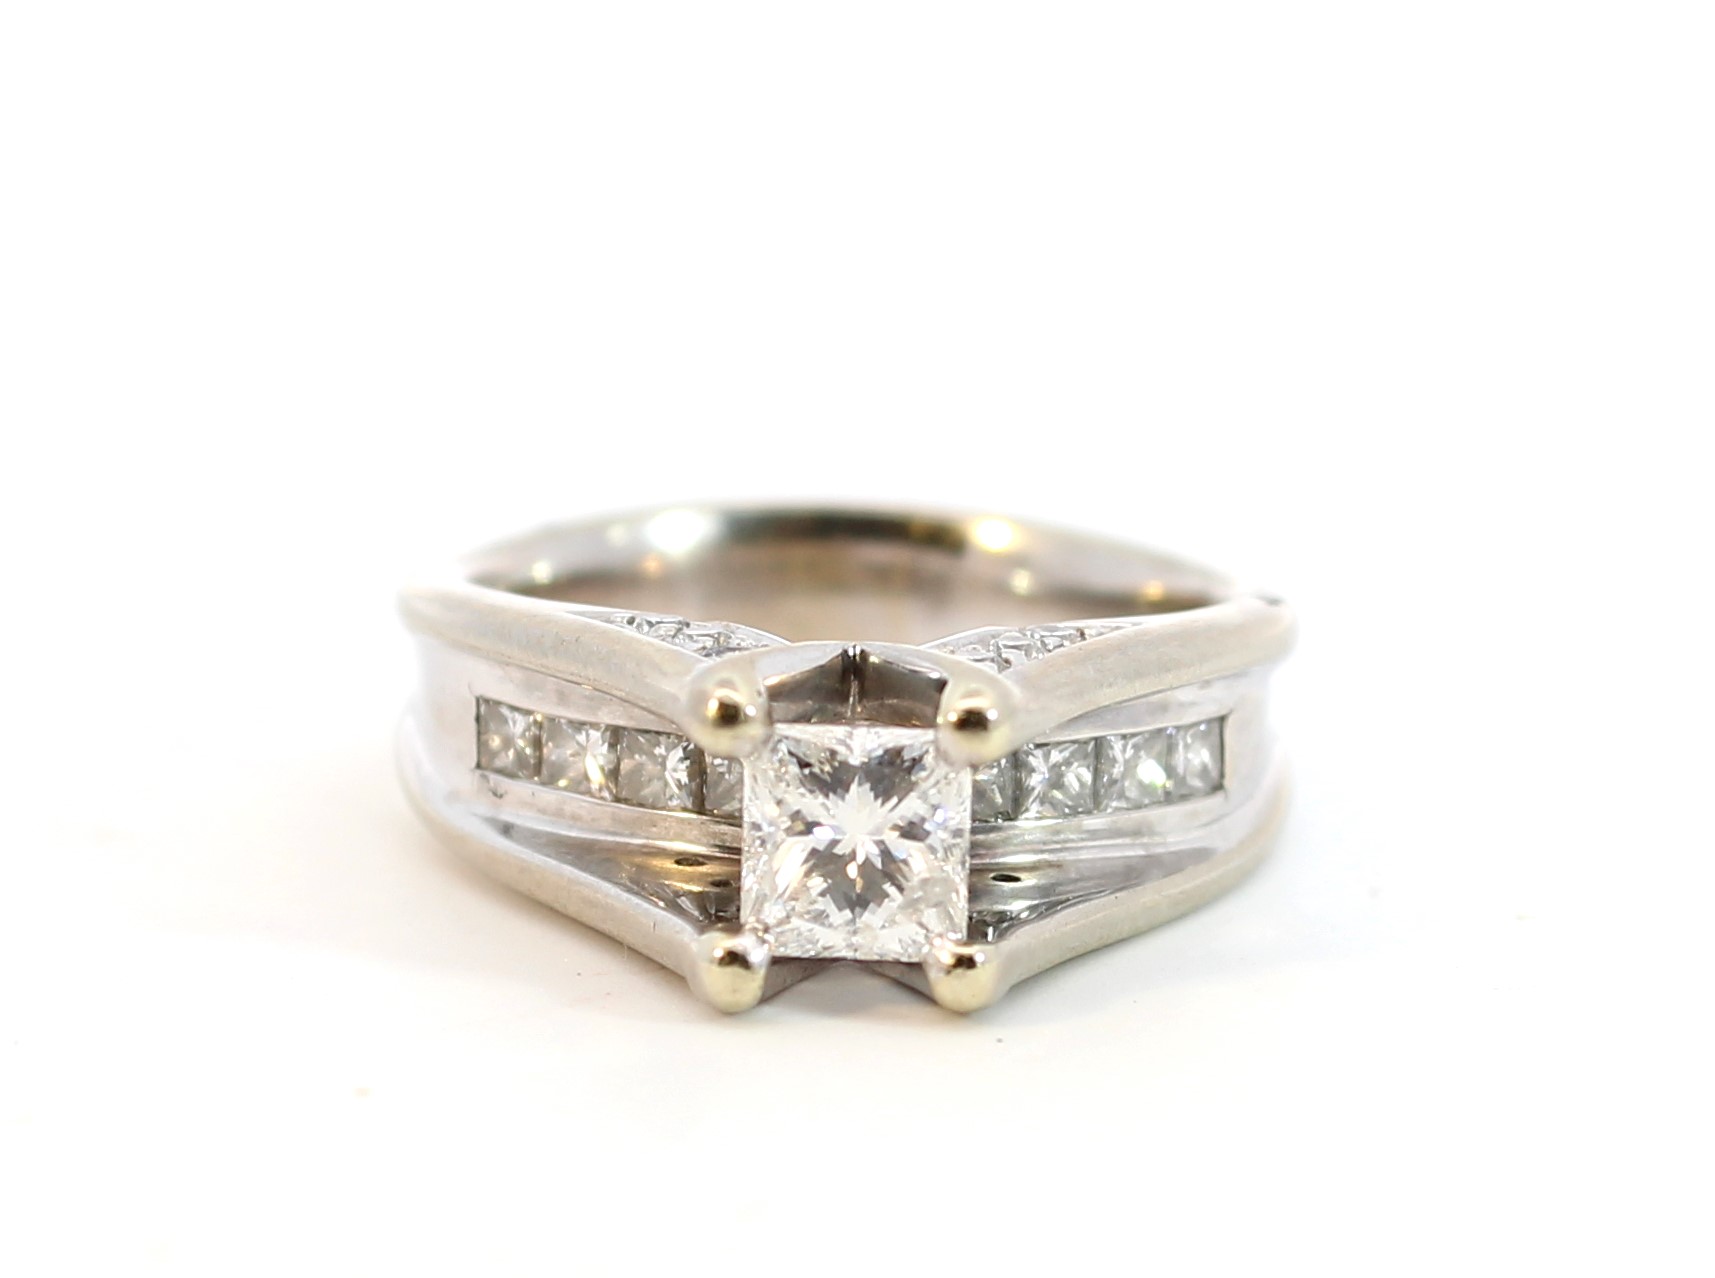 Estate 18 Karat White Gold Diamond Engagement Ring Having One Princess Cut Diamond Prong Set In A Raised Center Section Weighing Approximately 0.55 Carat Graded I1 For Clarity And I For Color